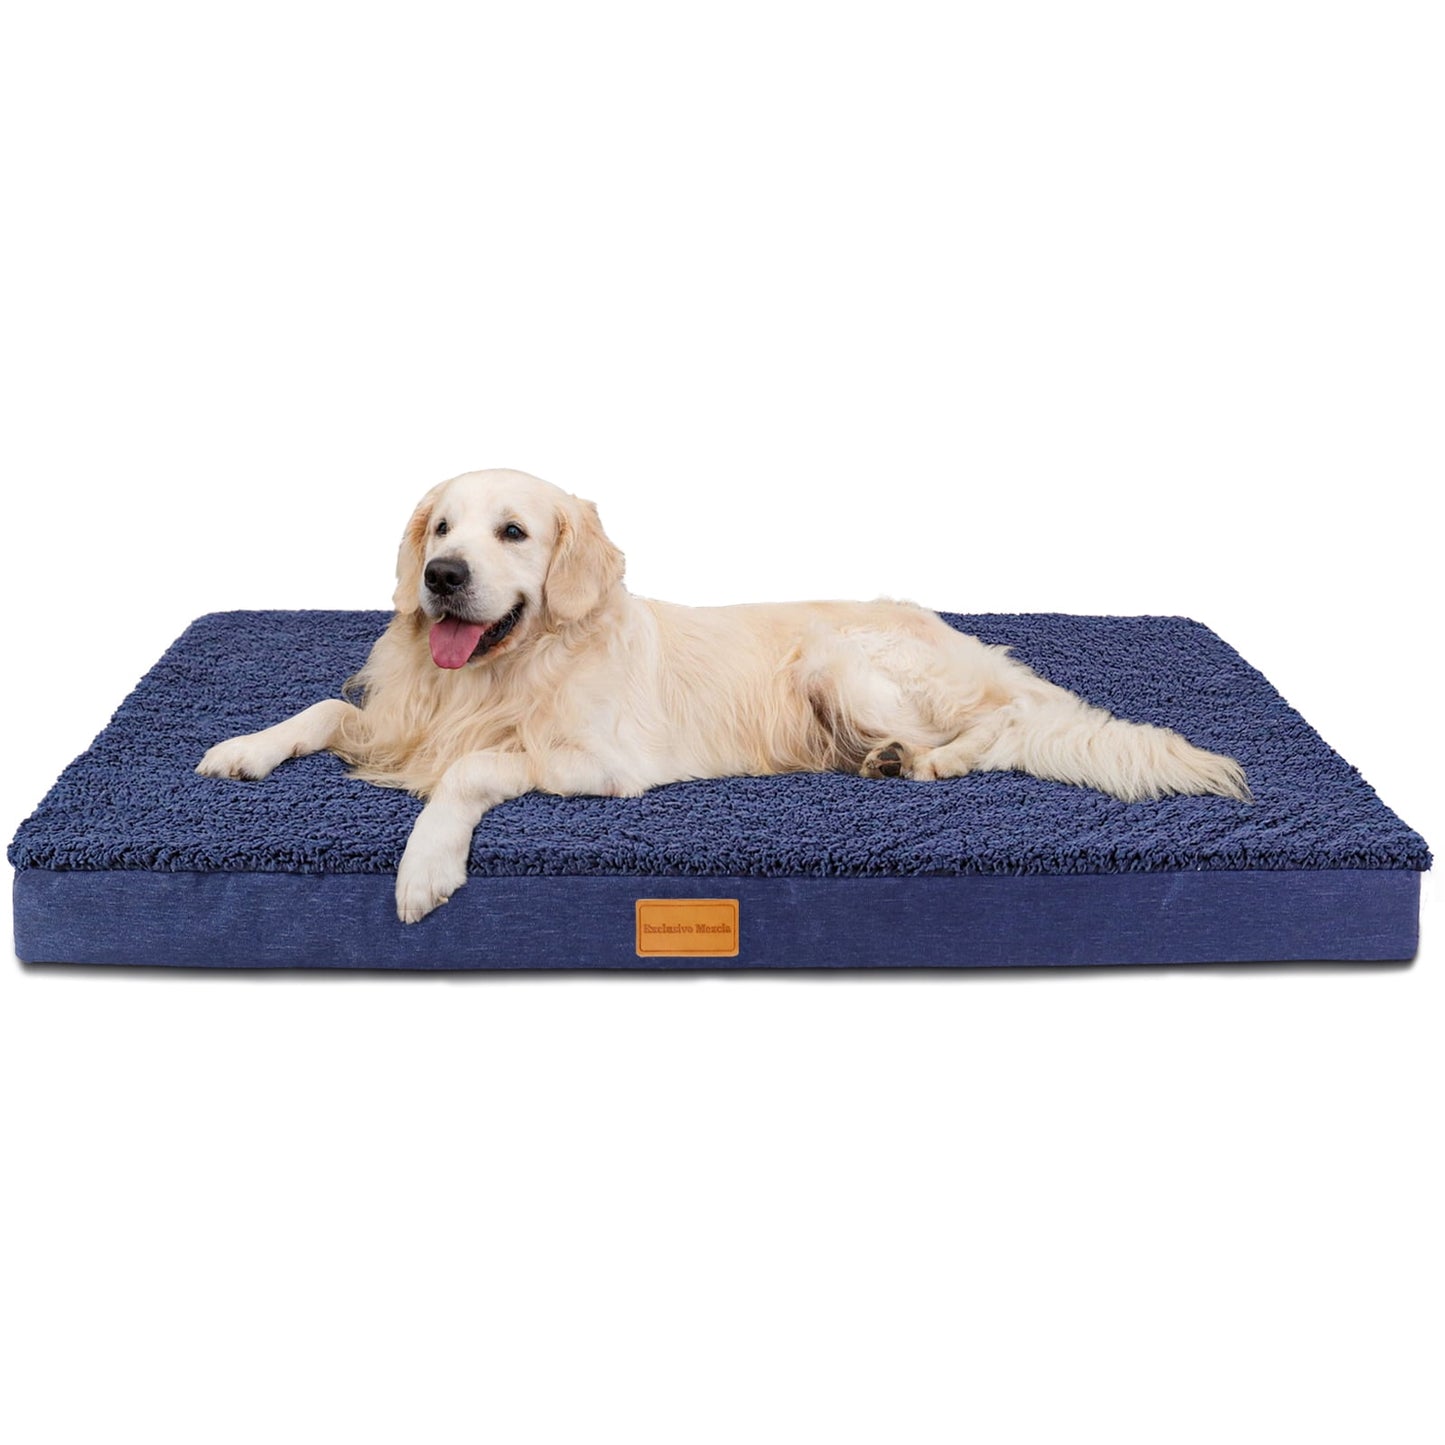 Exclusivo Mezcla Orthopedic XL Dog Bed for Large Dogs 42''X28'', Egg Crate Foam Big Large Dog Beds with Removable Washable Cover,Waterproof Pet Bed Mat, Navy Blue